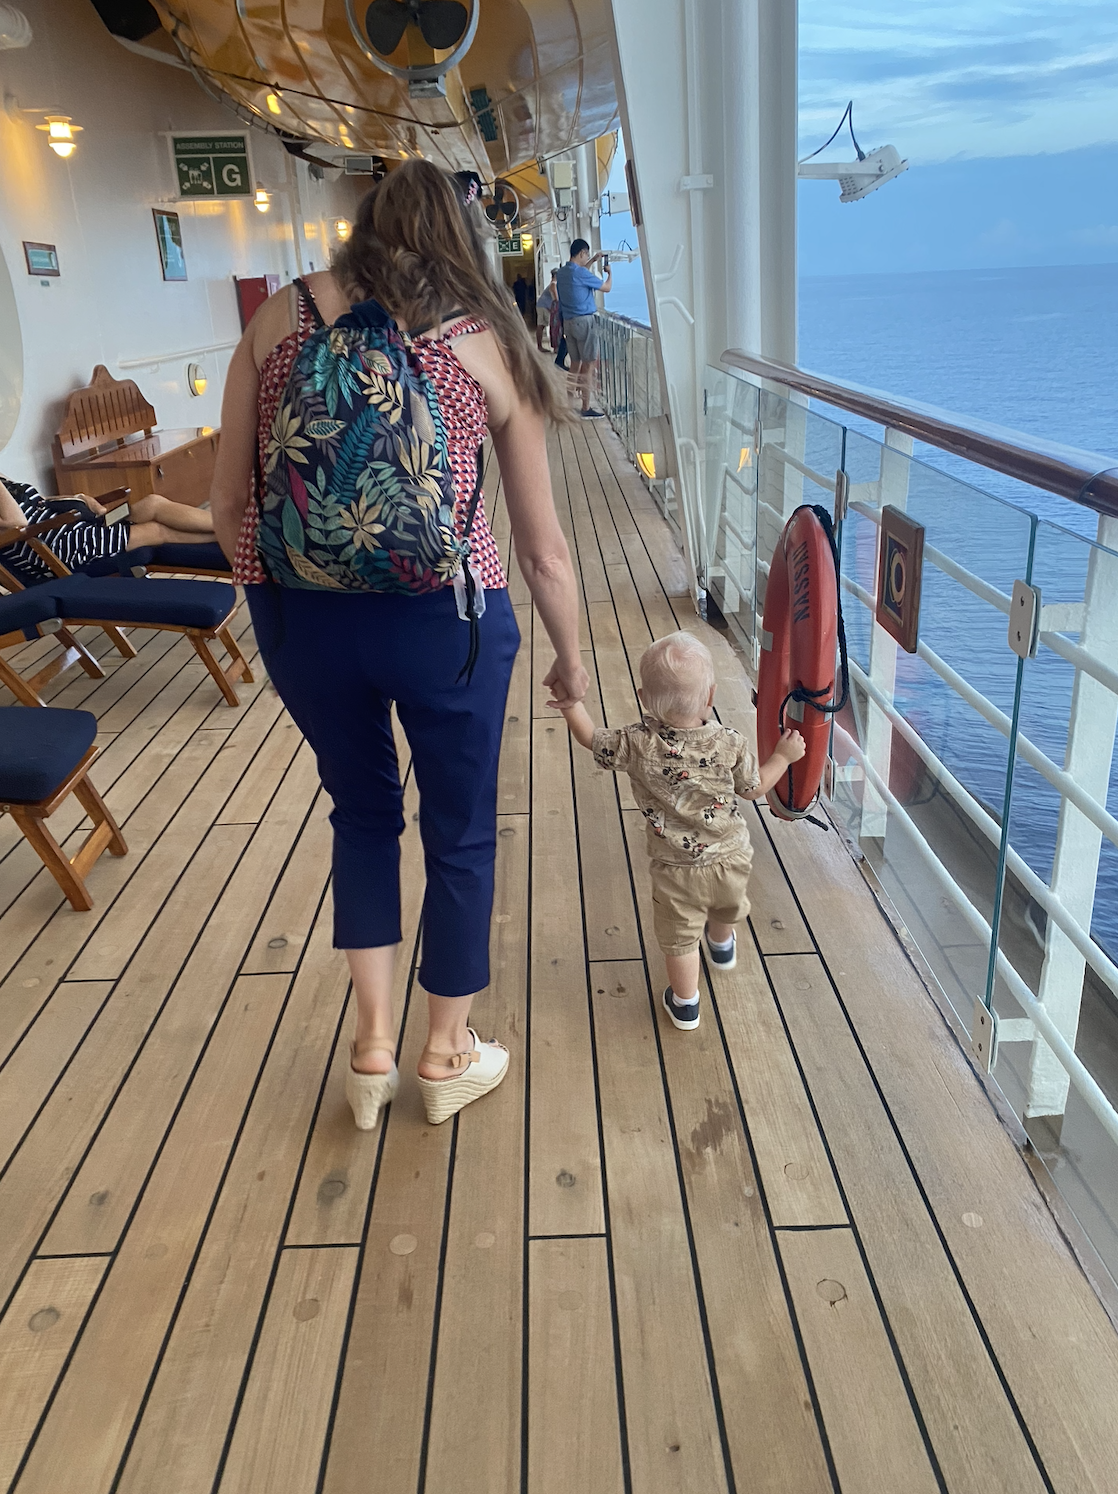 Woman holding hands with a child while walking on the deck of a cruise ship. The woman is wearing cropped pants and a patterned sleeveless top. The child is dressed in a printed outfit